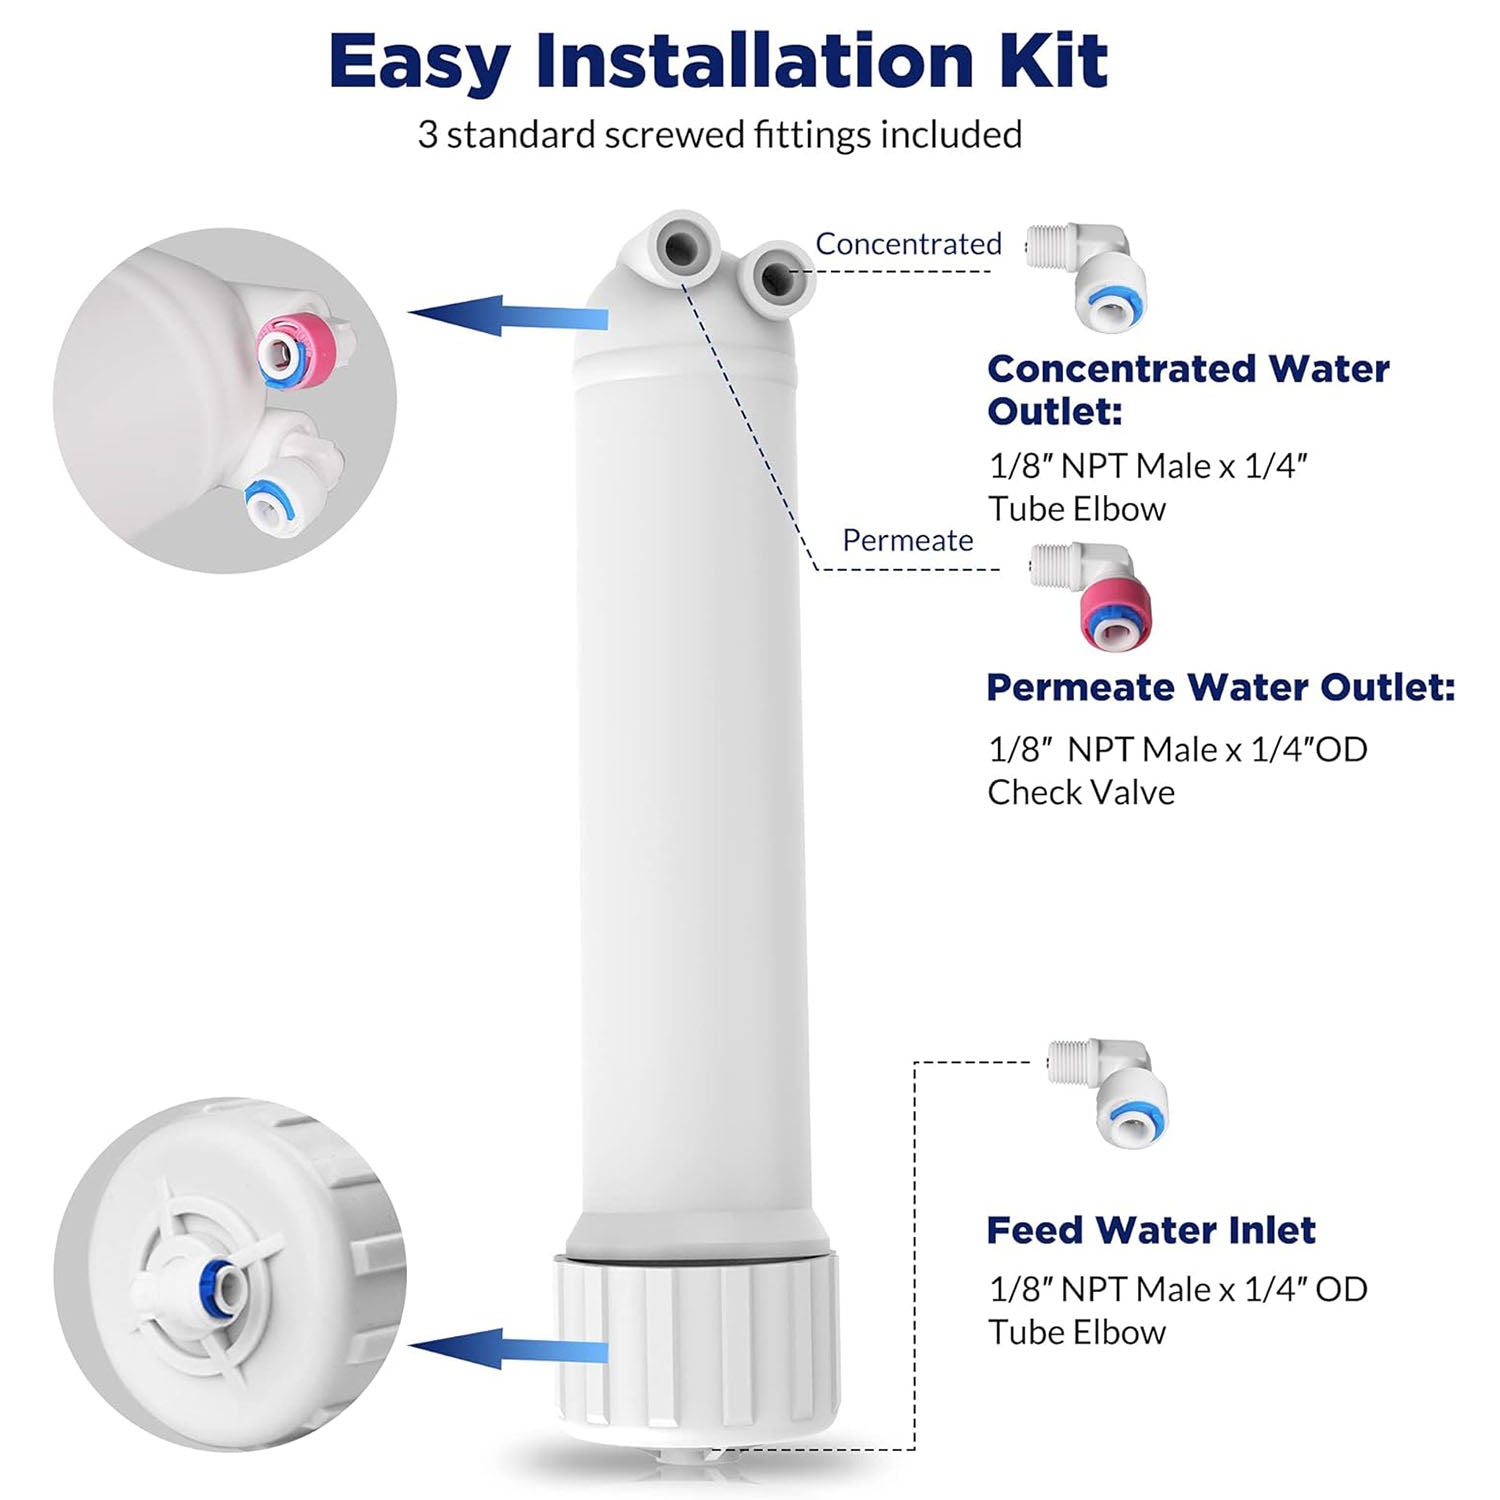 Membrane Solutions RO Membrane with Reverse Osmosis Membrane Housing Set for DIY RO Water System for Maple Syrup/Sap